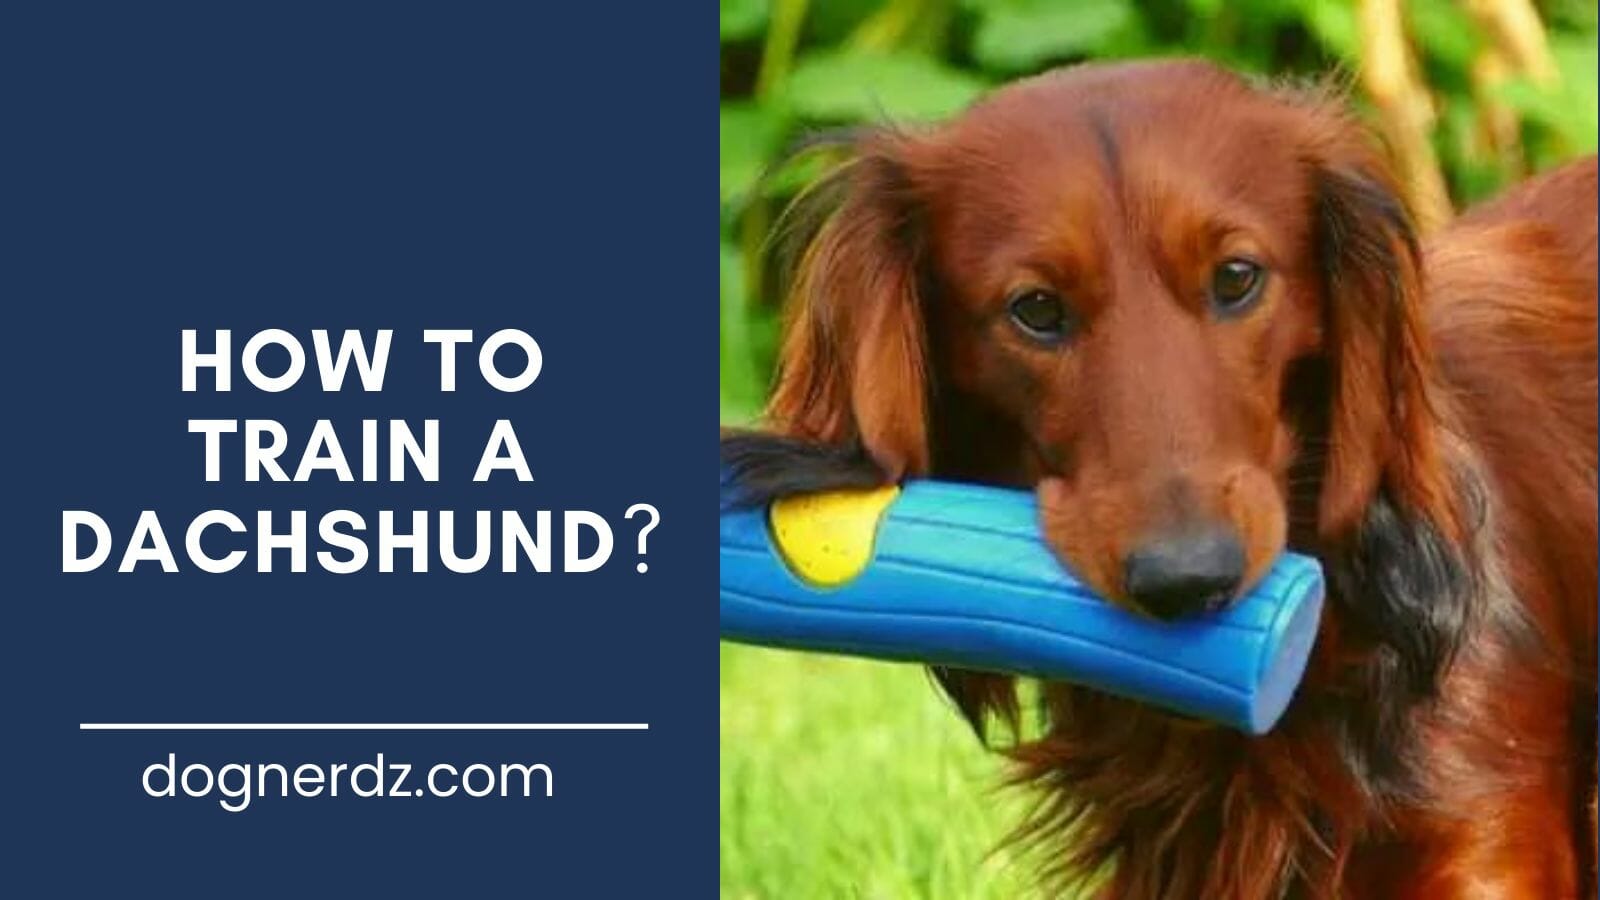 guide on how to train a dachshund